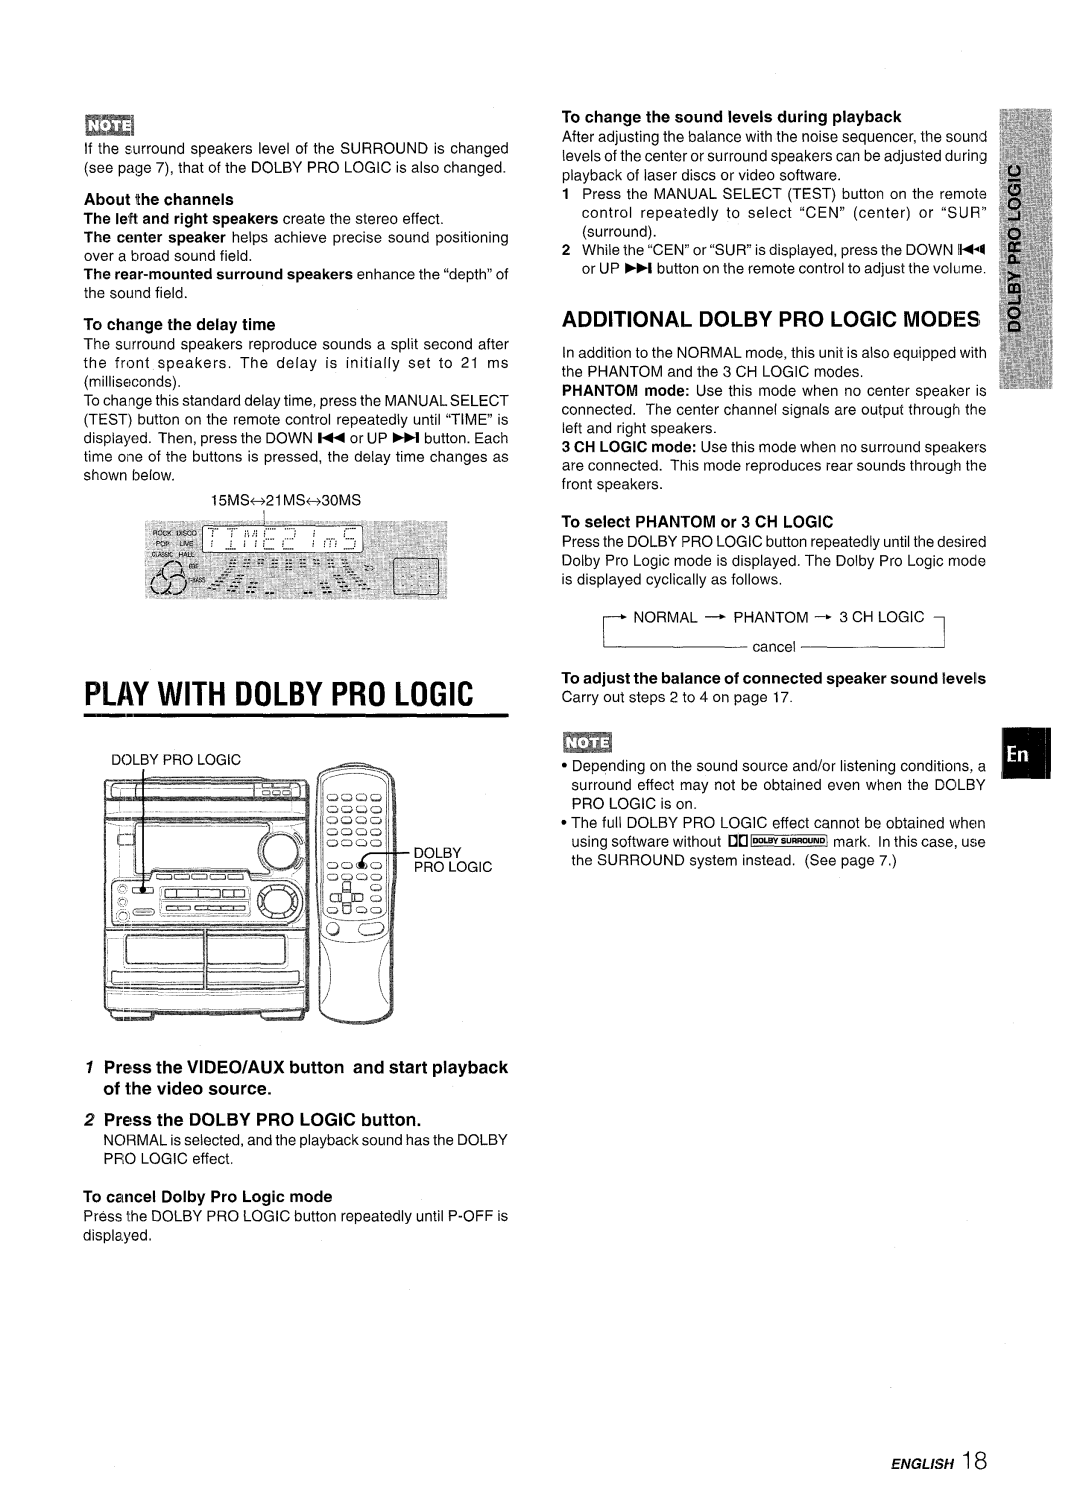 Aiwa CX-NMT50 manual Play With Dolby Pro Logic, Additional Dolby Pro Logic Modes, About the channels, ENGLISH18 